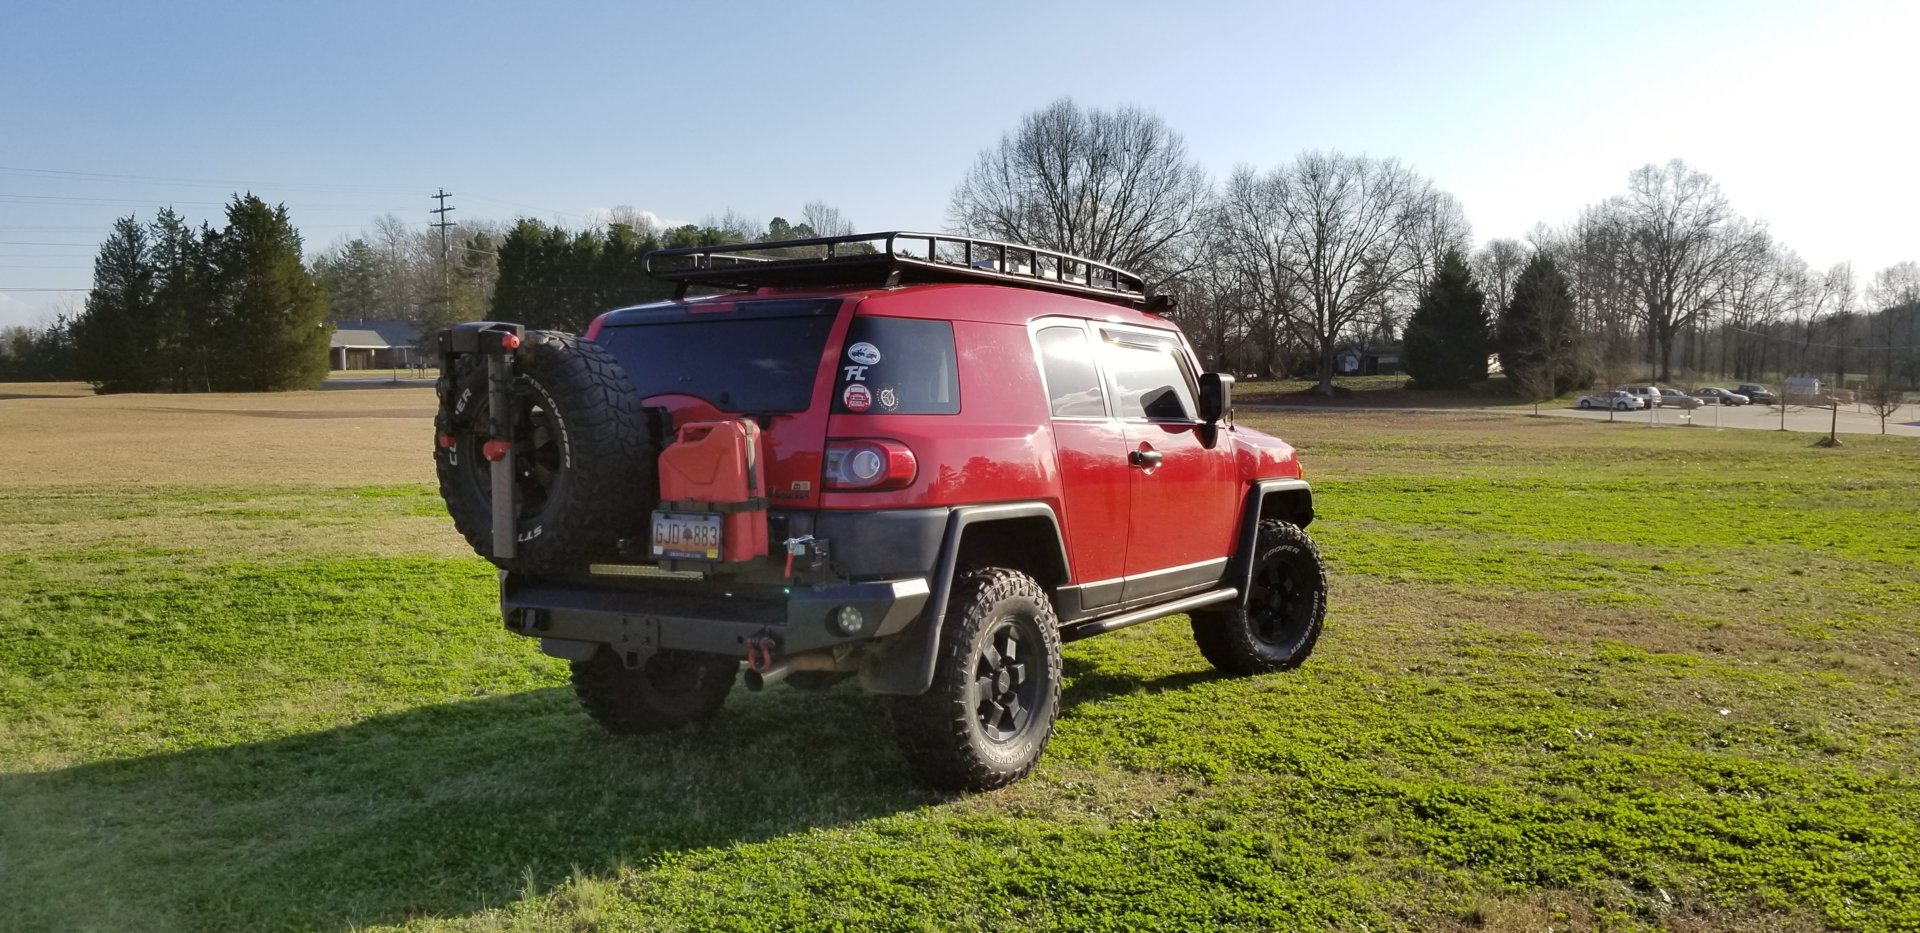 For Sale - 2012 Red Trail Teams Modded | IH8MUD Forum